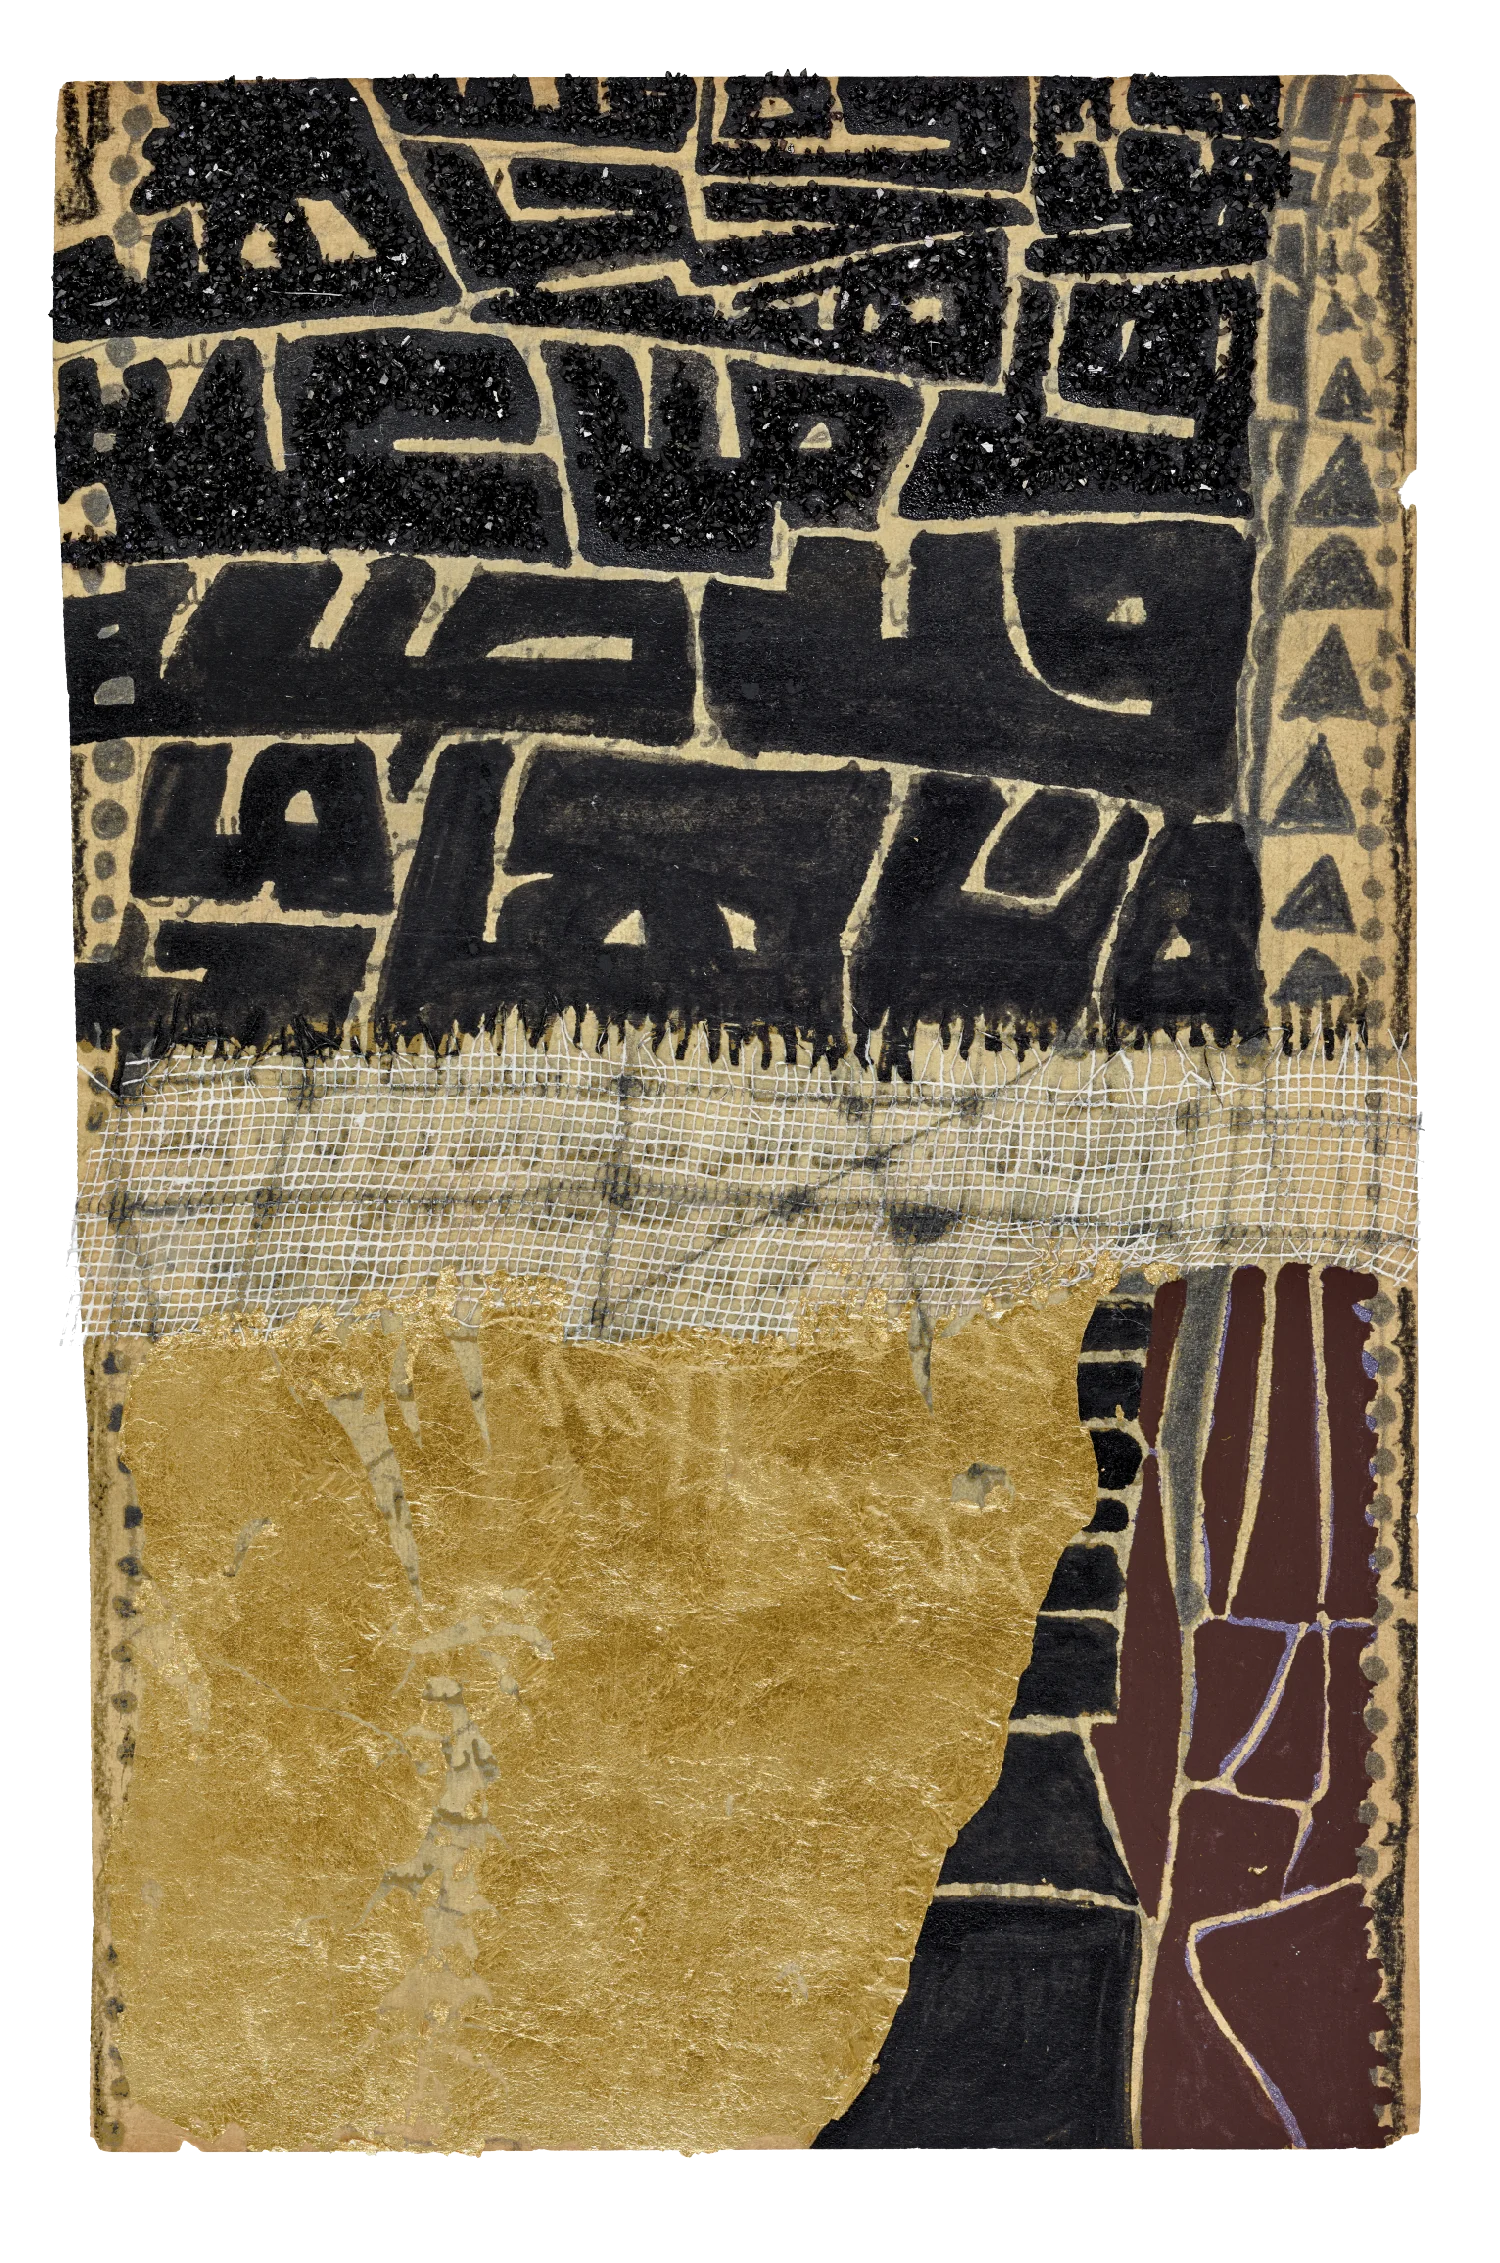 Untitled (Text) (Undated)